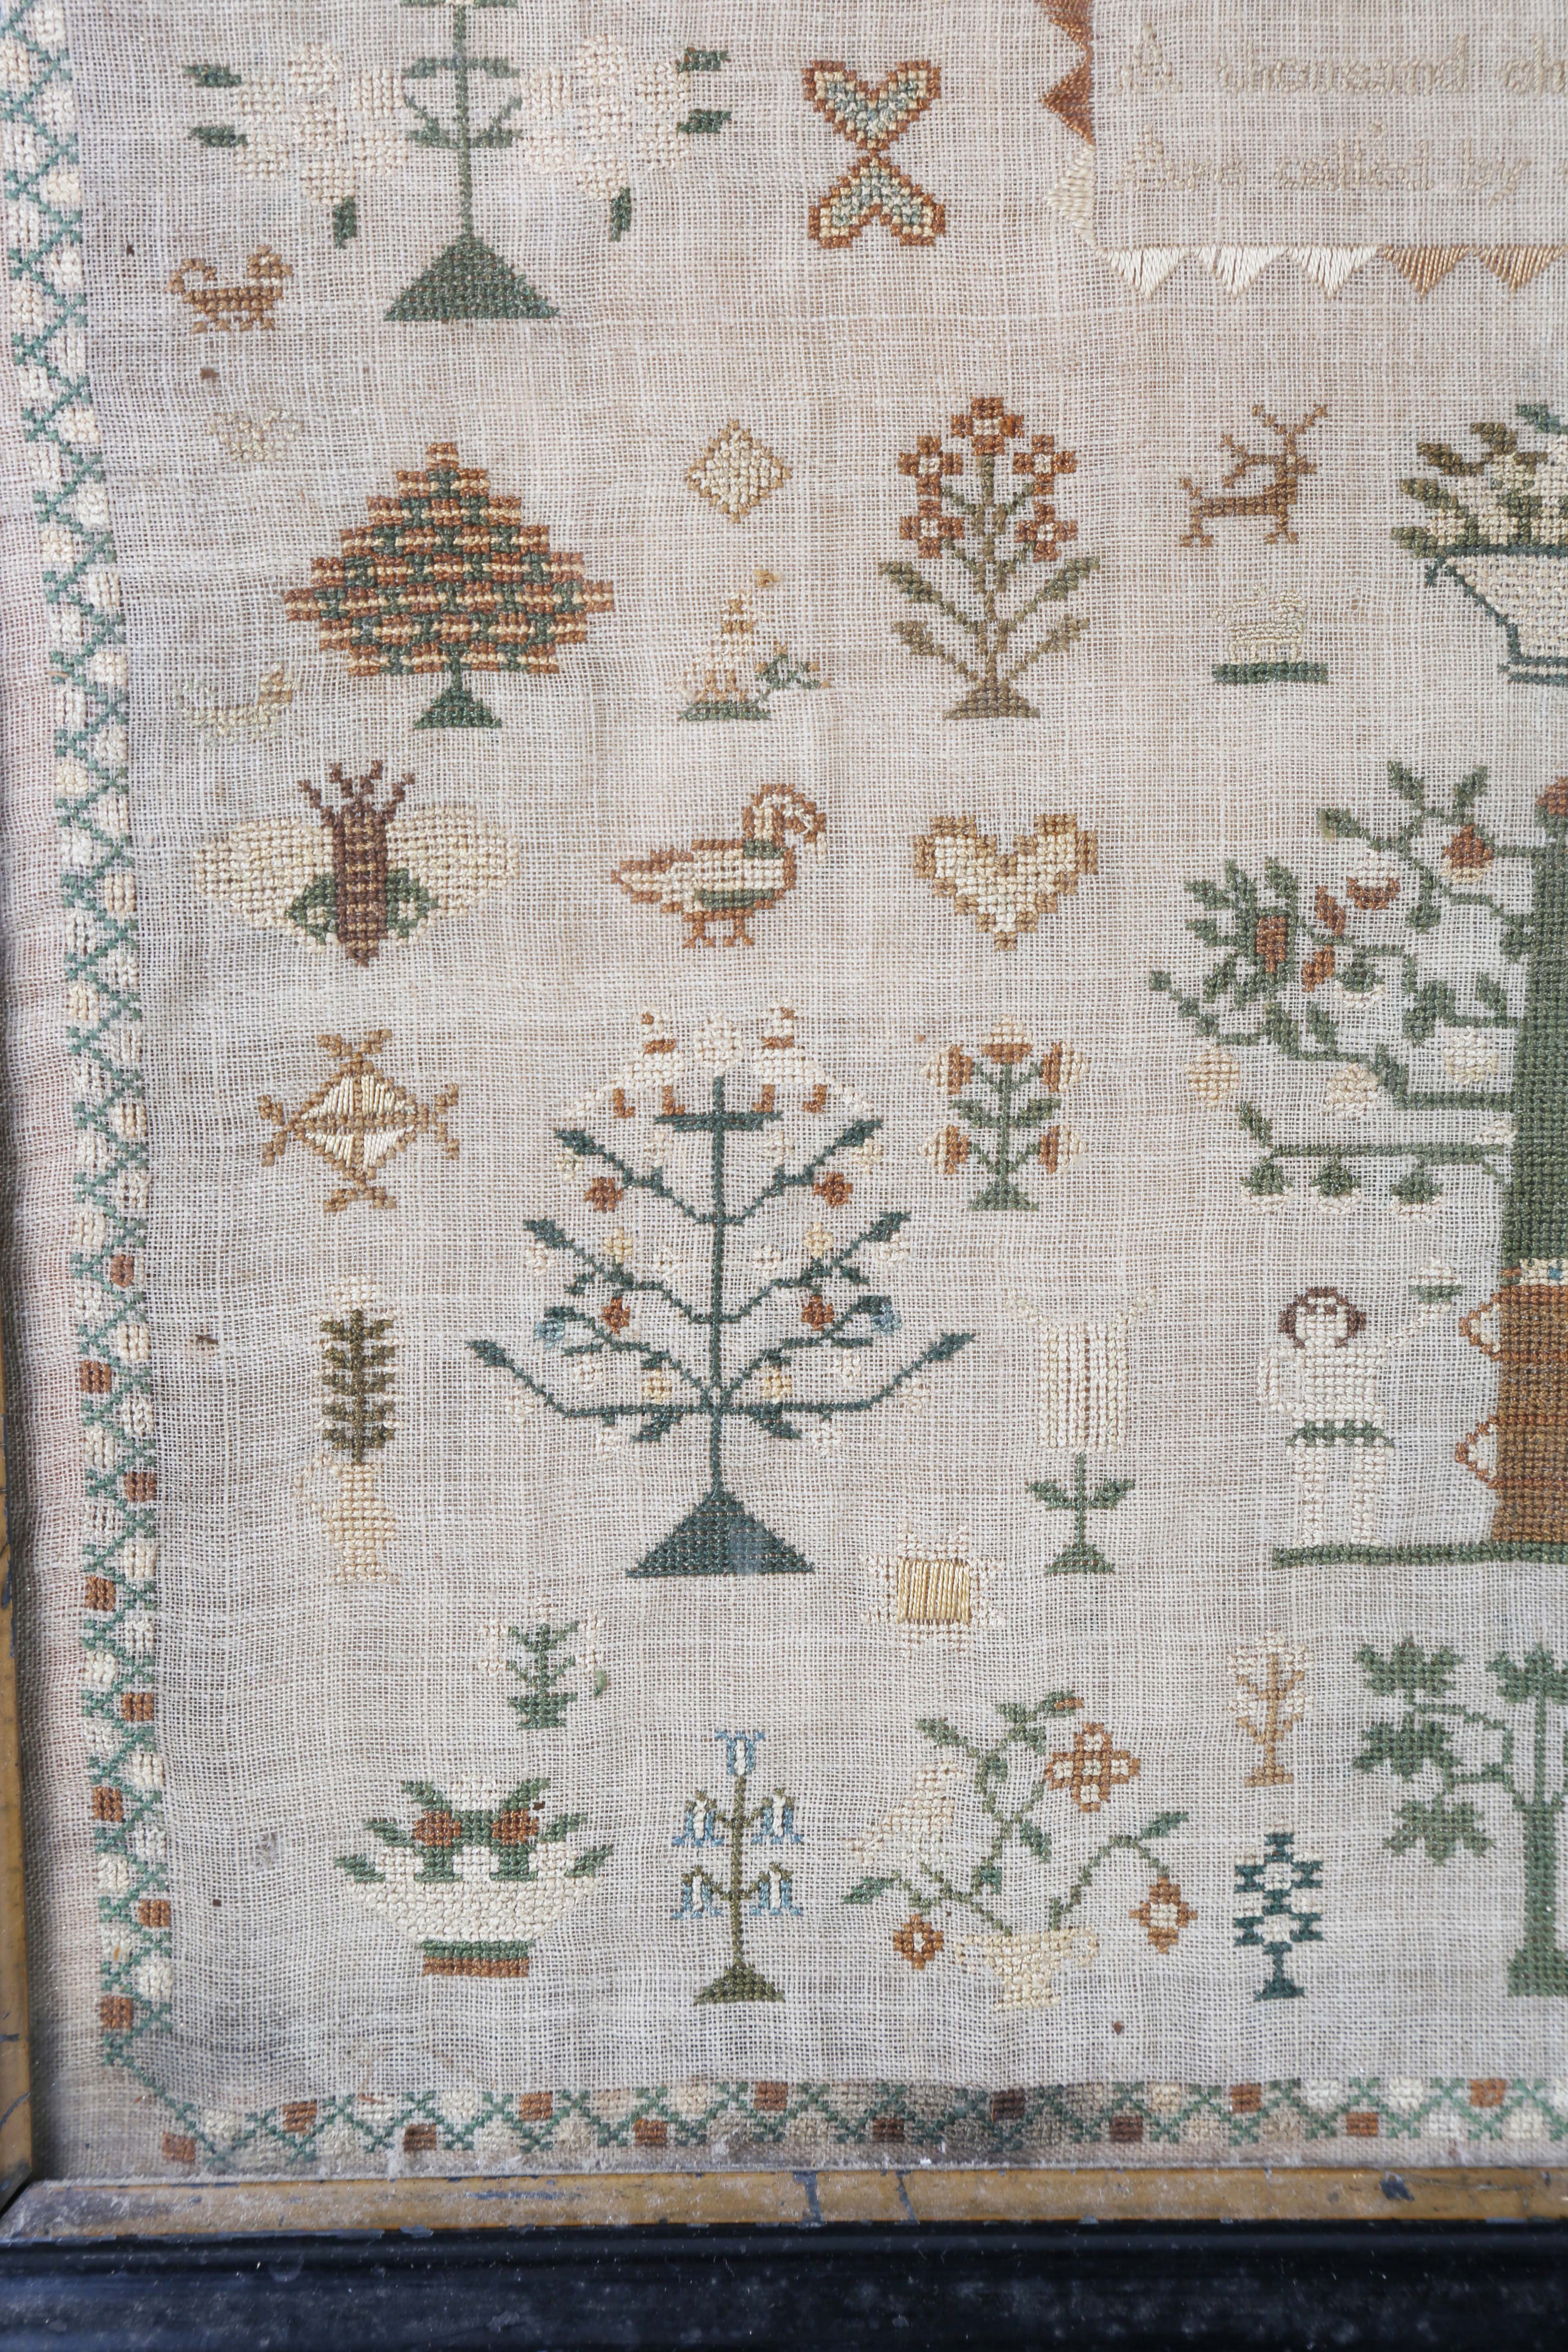 An early Victorian needlework sampler by Jane Constance, aged 13, dated 'January 6 1839', finely - Image 10 of 14